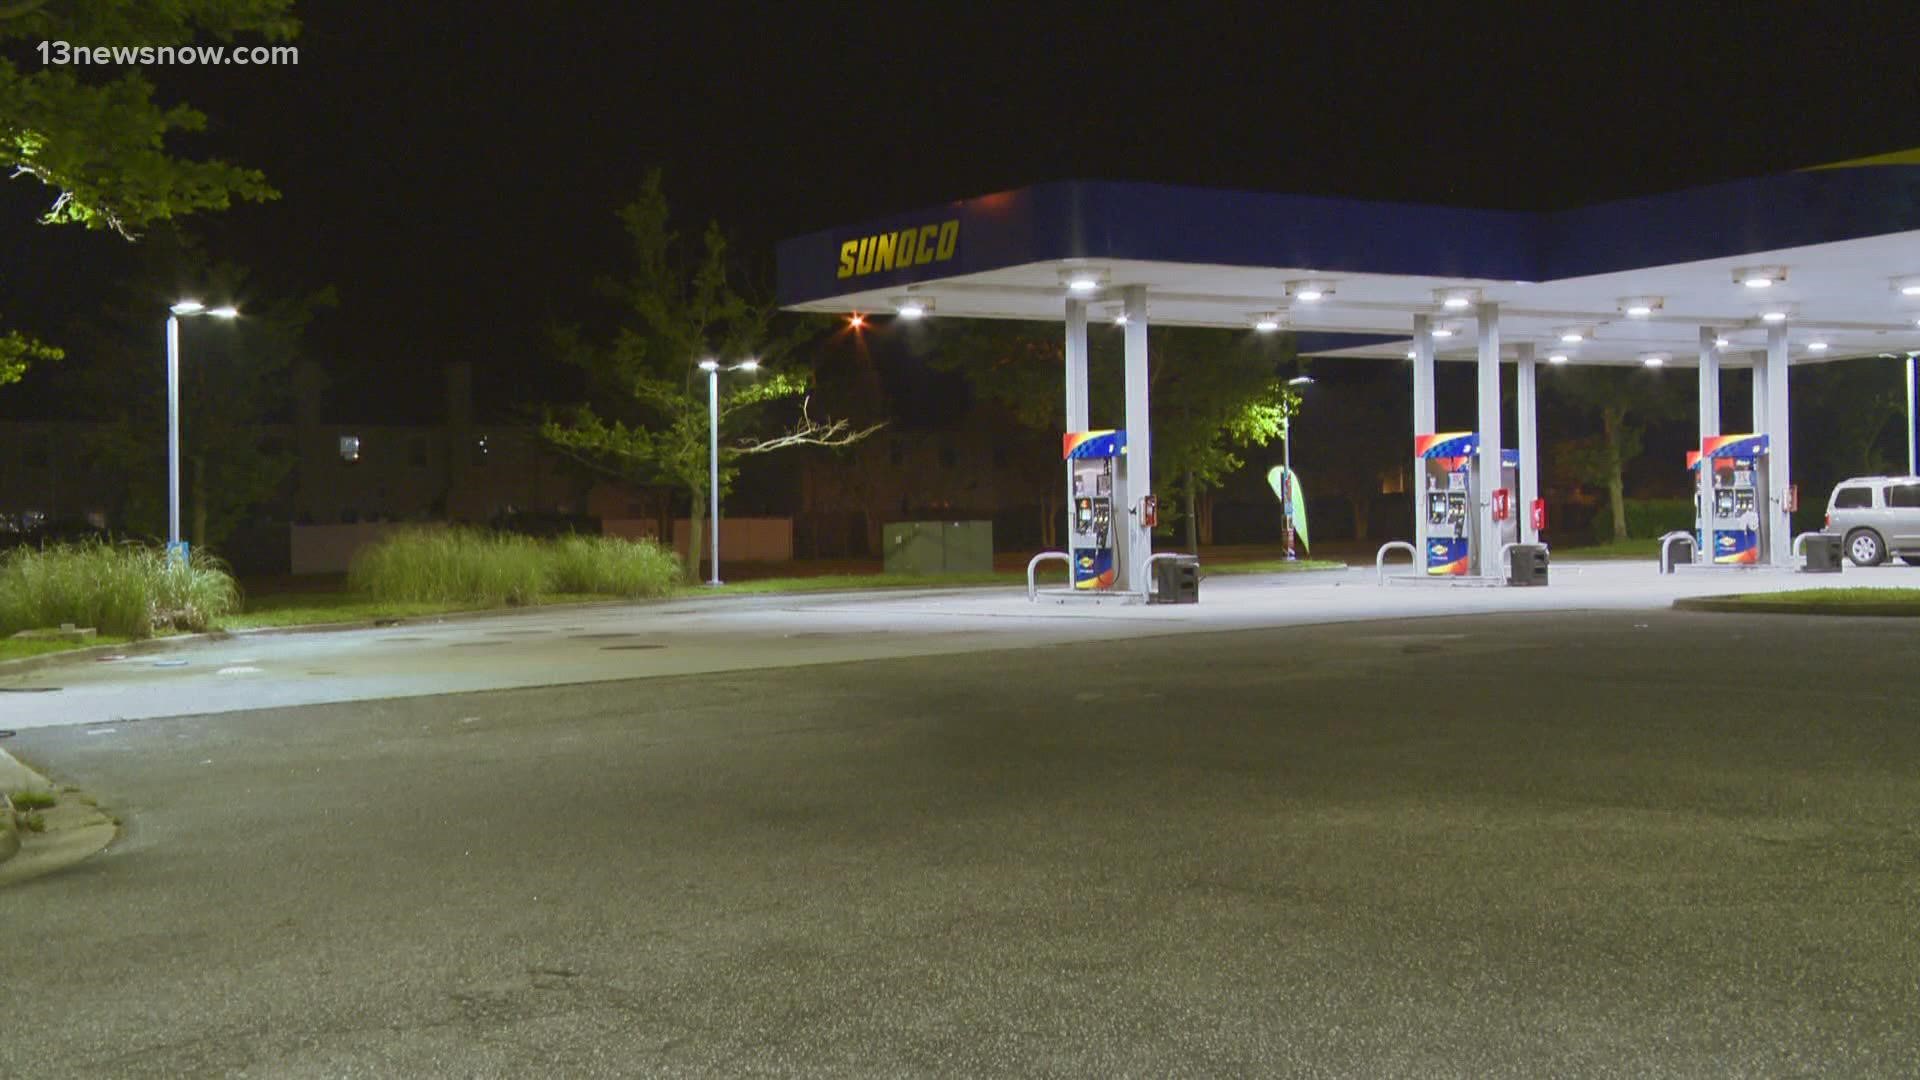 After police said two men stole thousands of dollars worth of fuel, they are increasing patrols to pay attention to local gas stations.